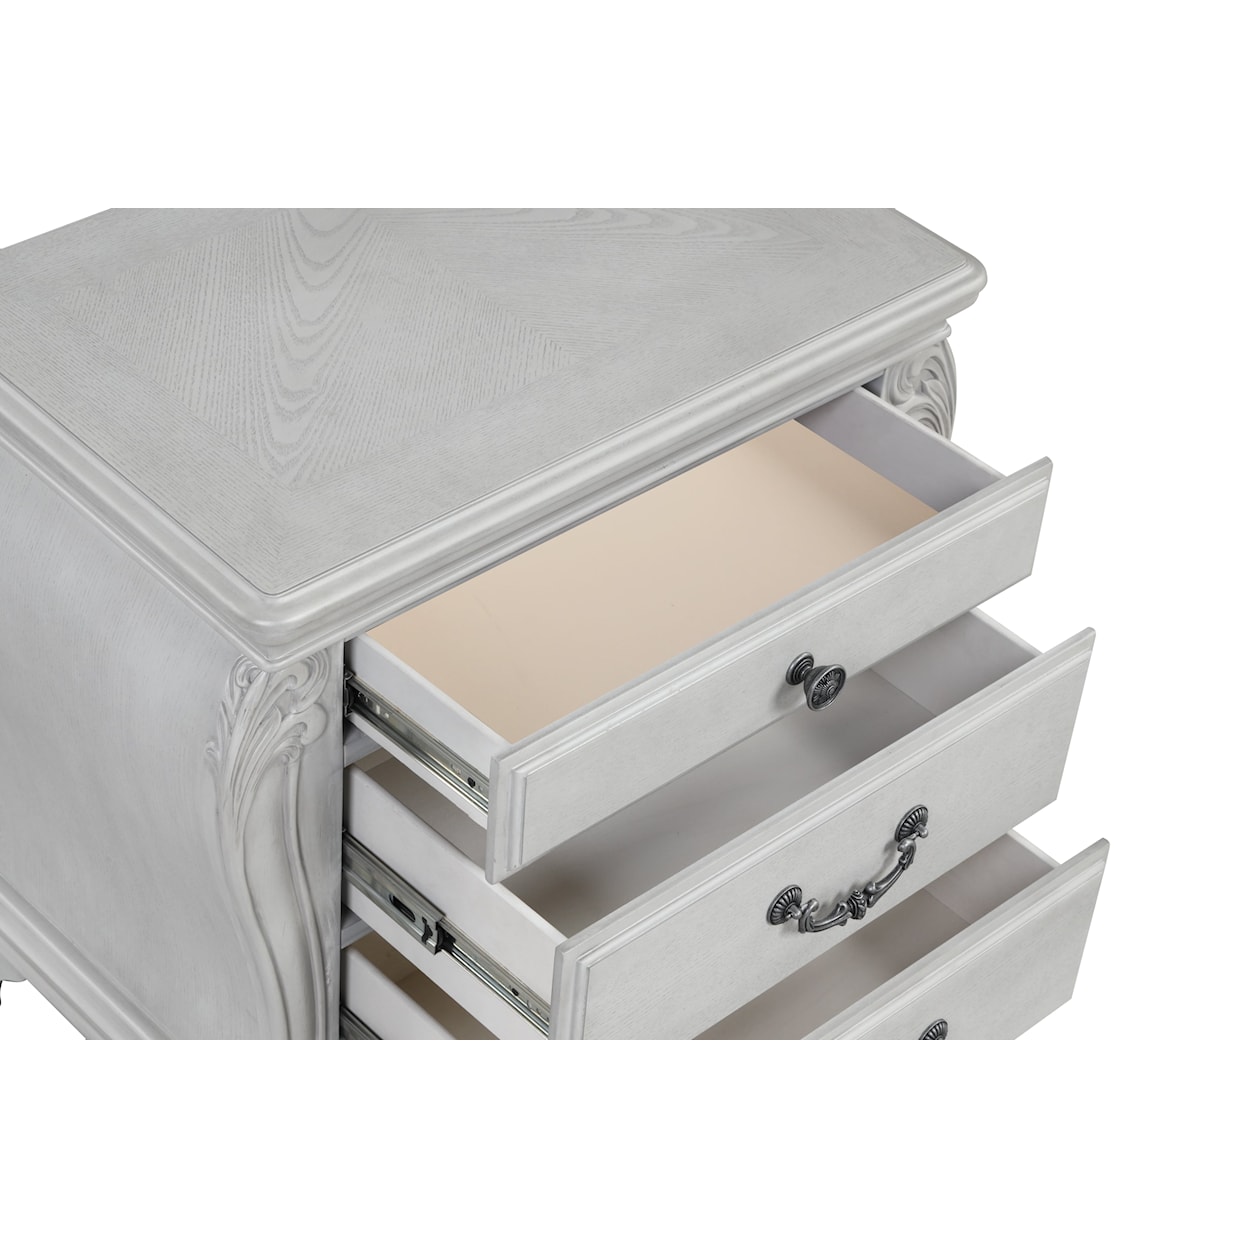 New Classic Cambria Hills 3-Drawer Nightstand